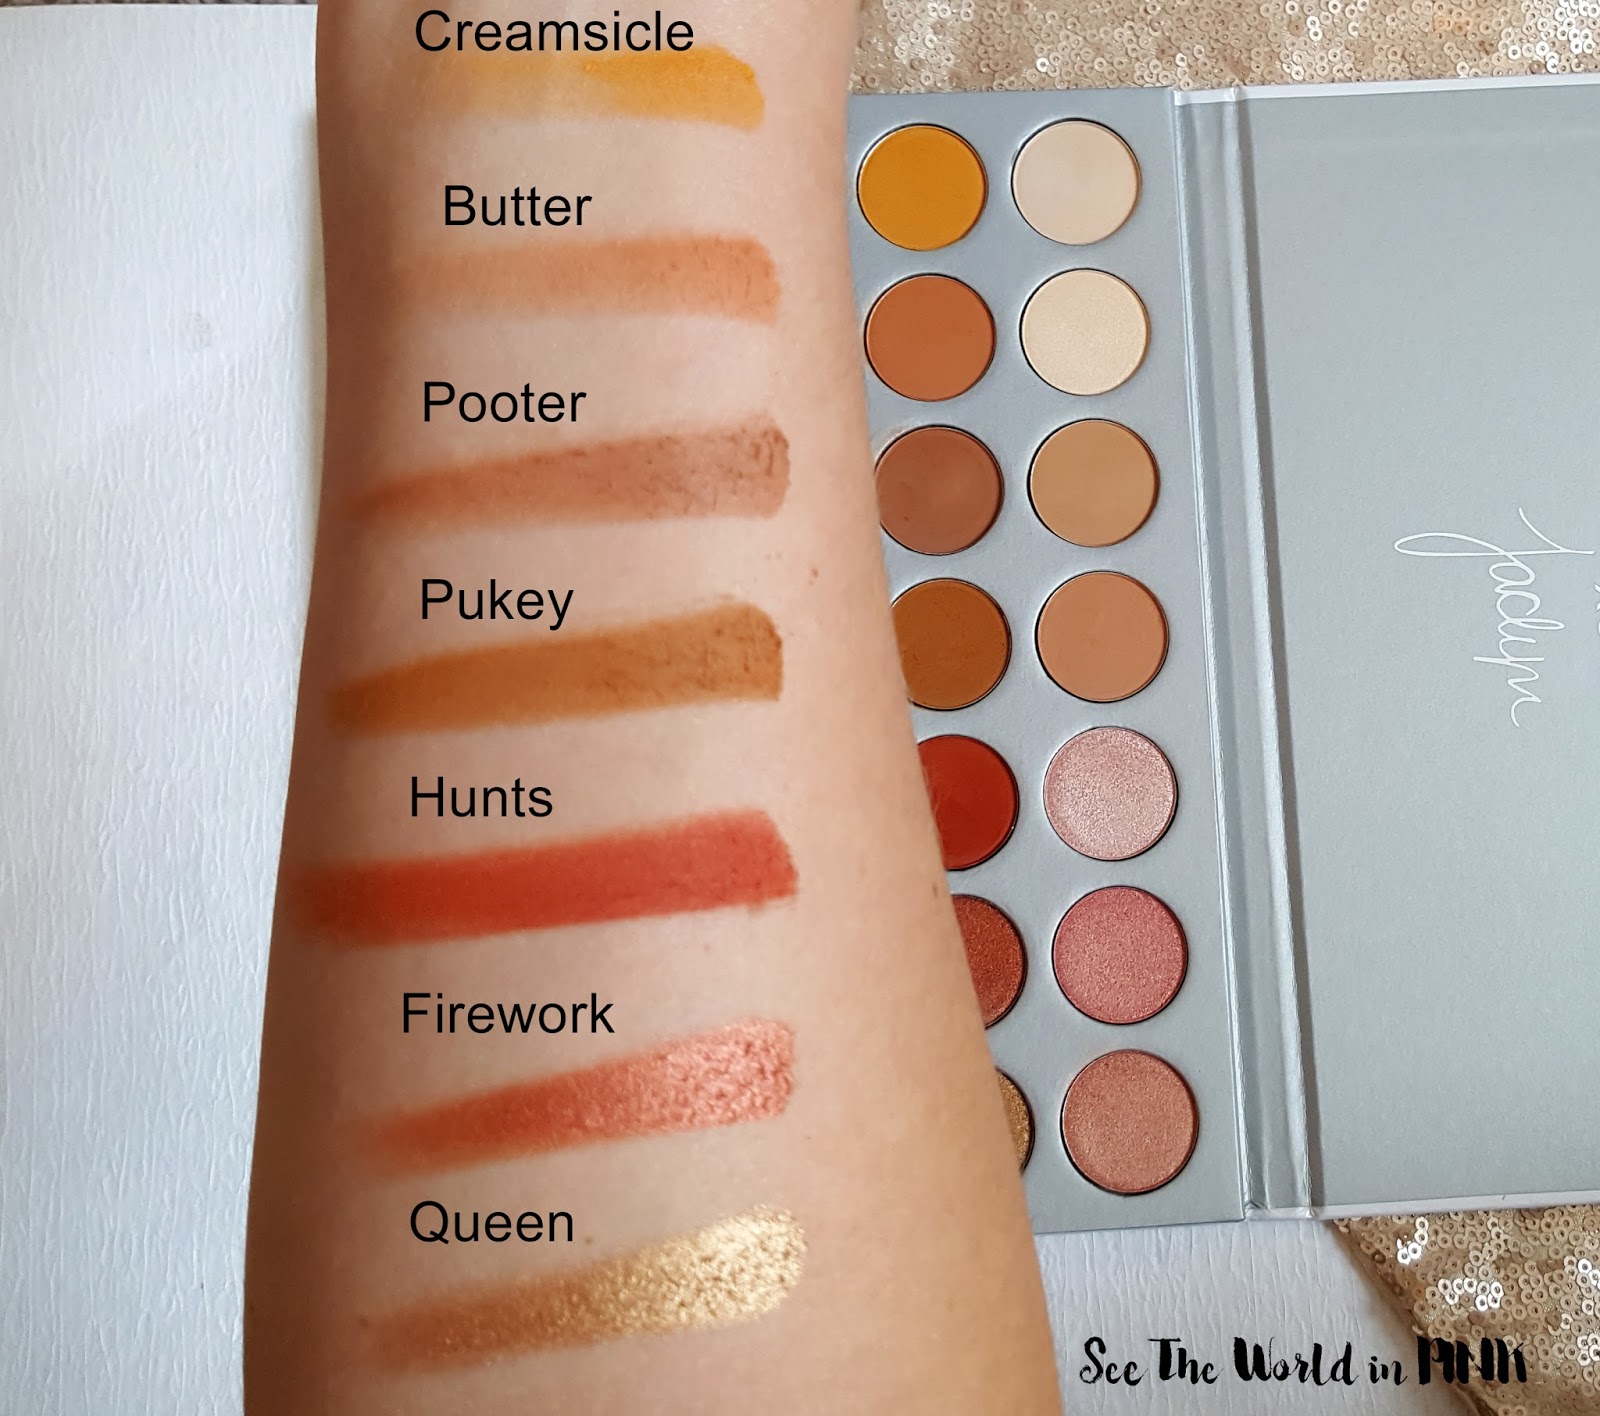 Morphe x Jaclyn Hill "The Jaclyn Hill Palette" - Swatches, First Impressions, and Thoughts